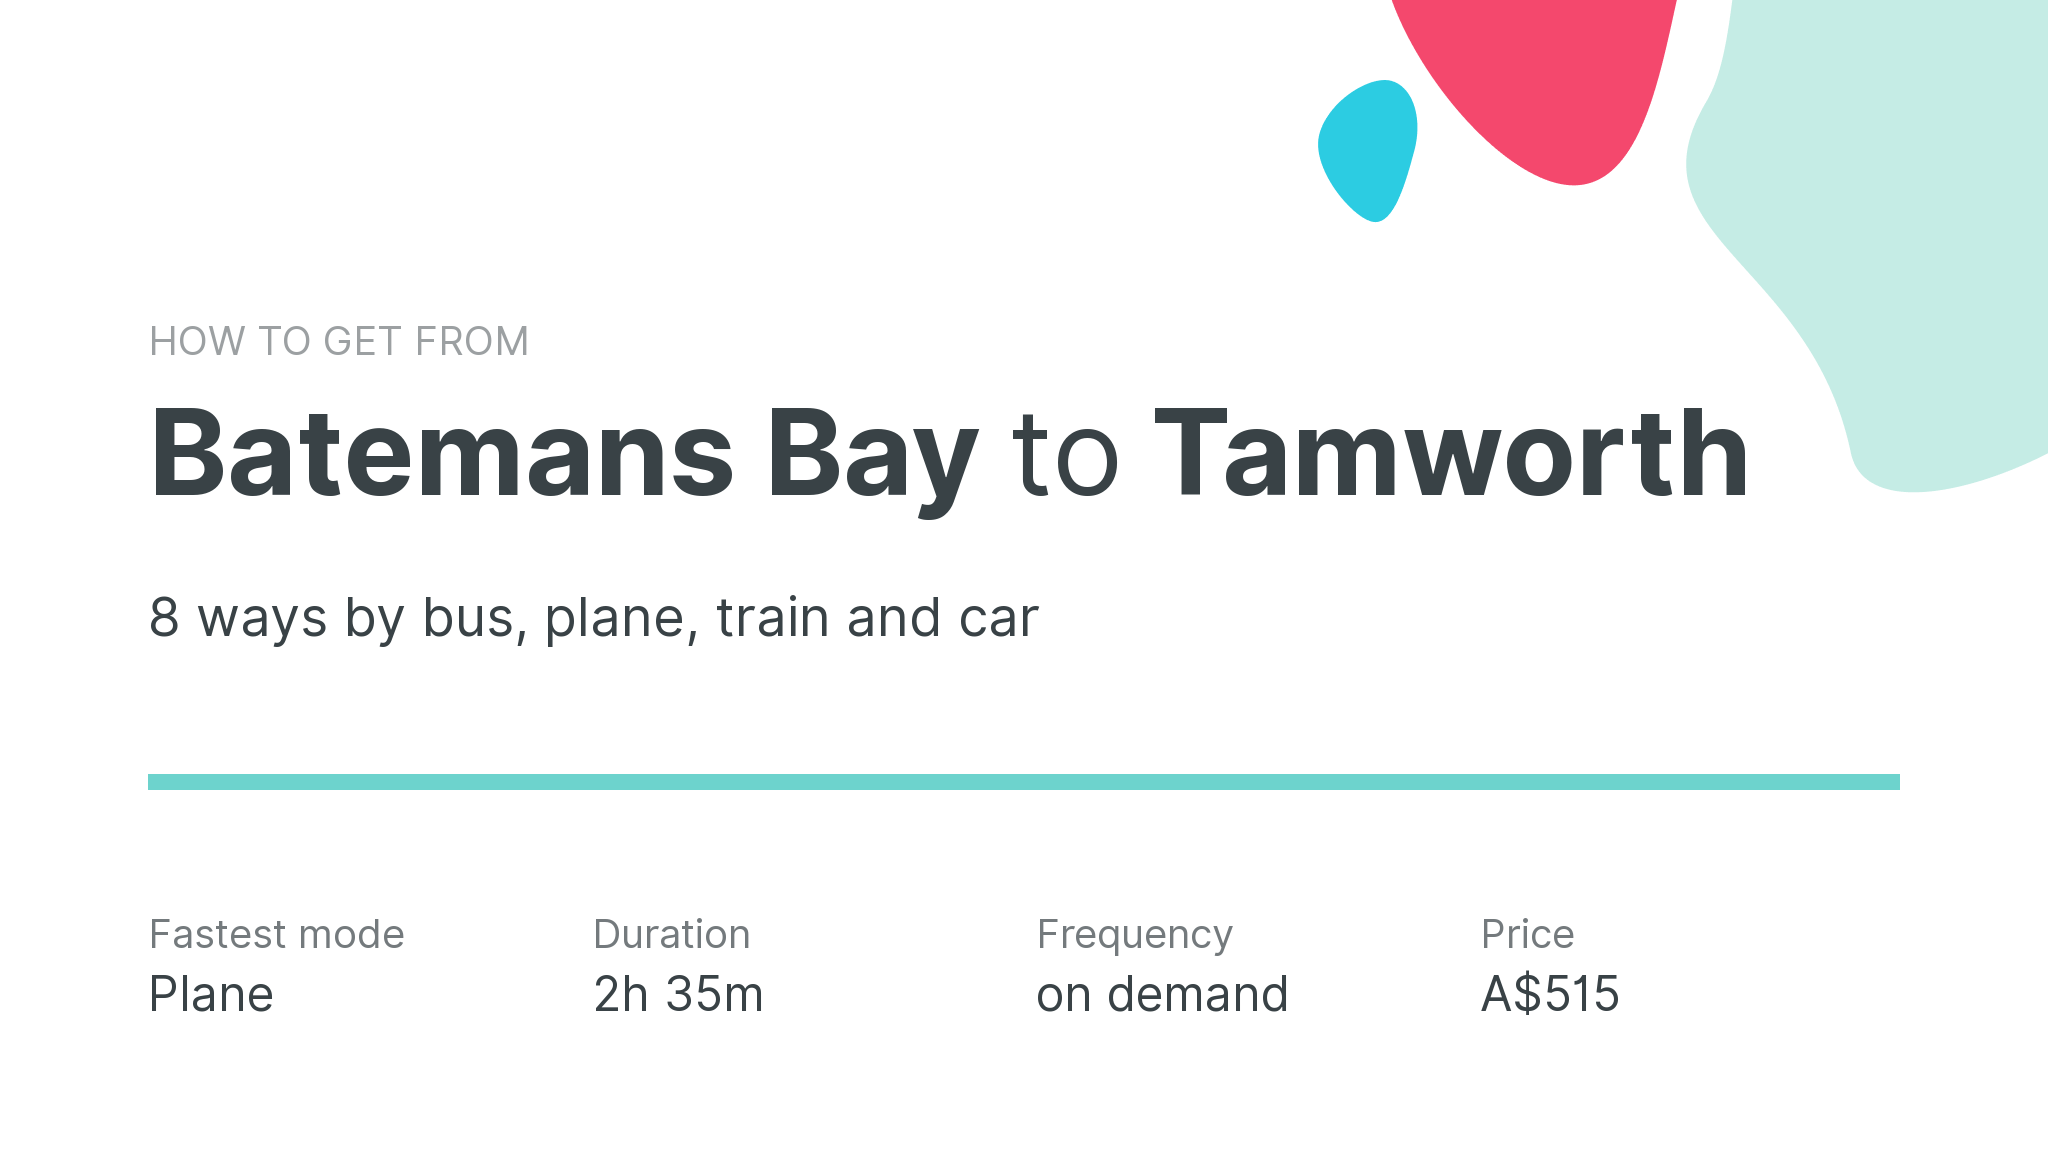 How do I get from Batemans Bay to Tamworth